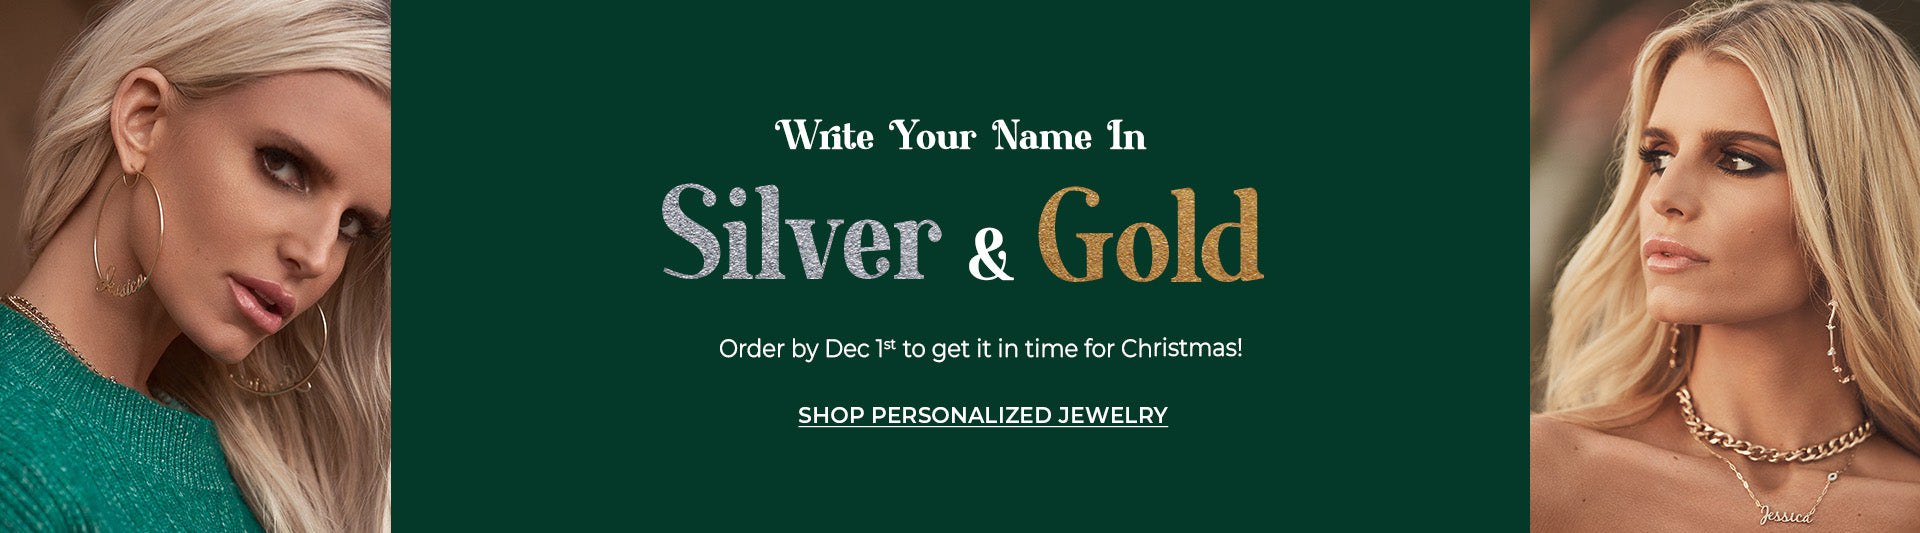 Write Your Name in Silver & Gold - personalized jewelry